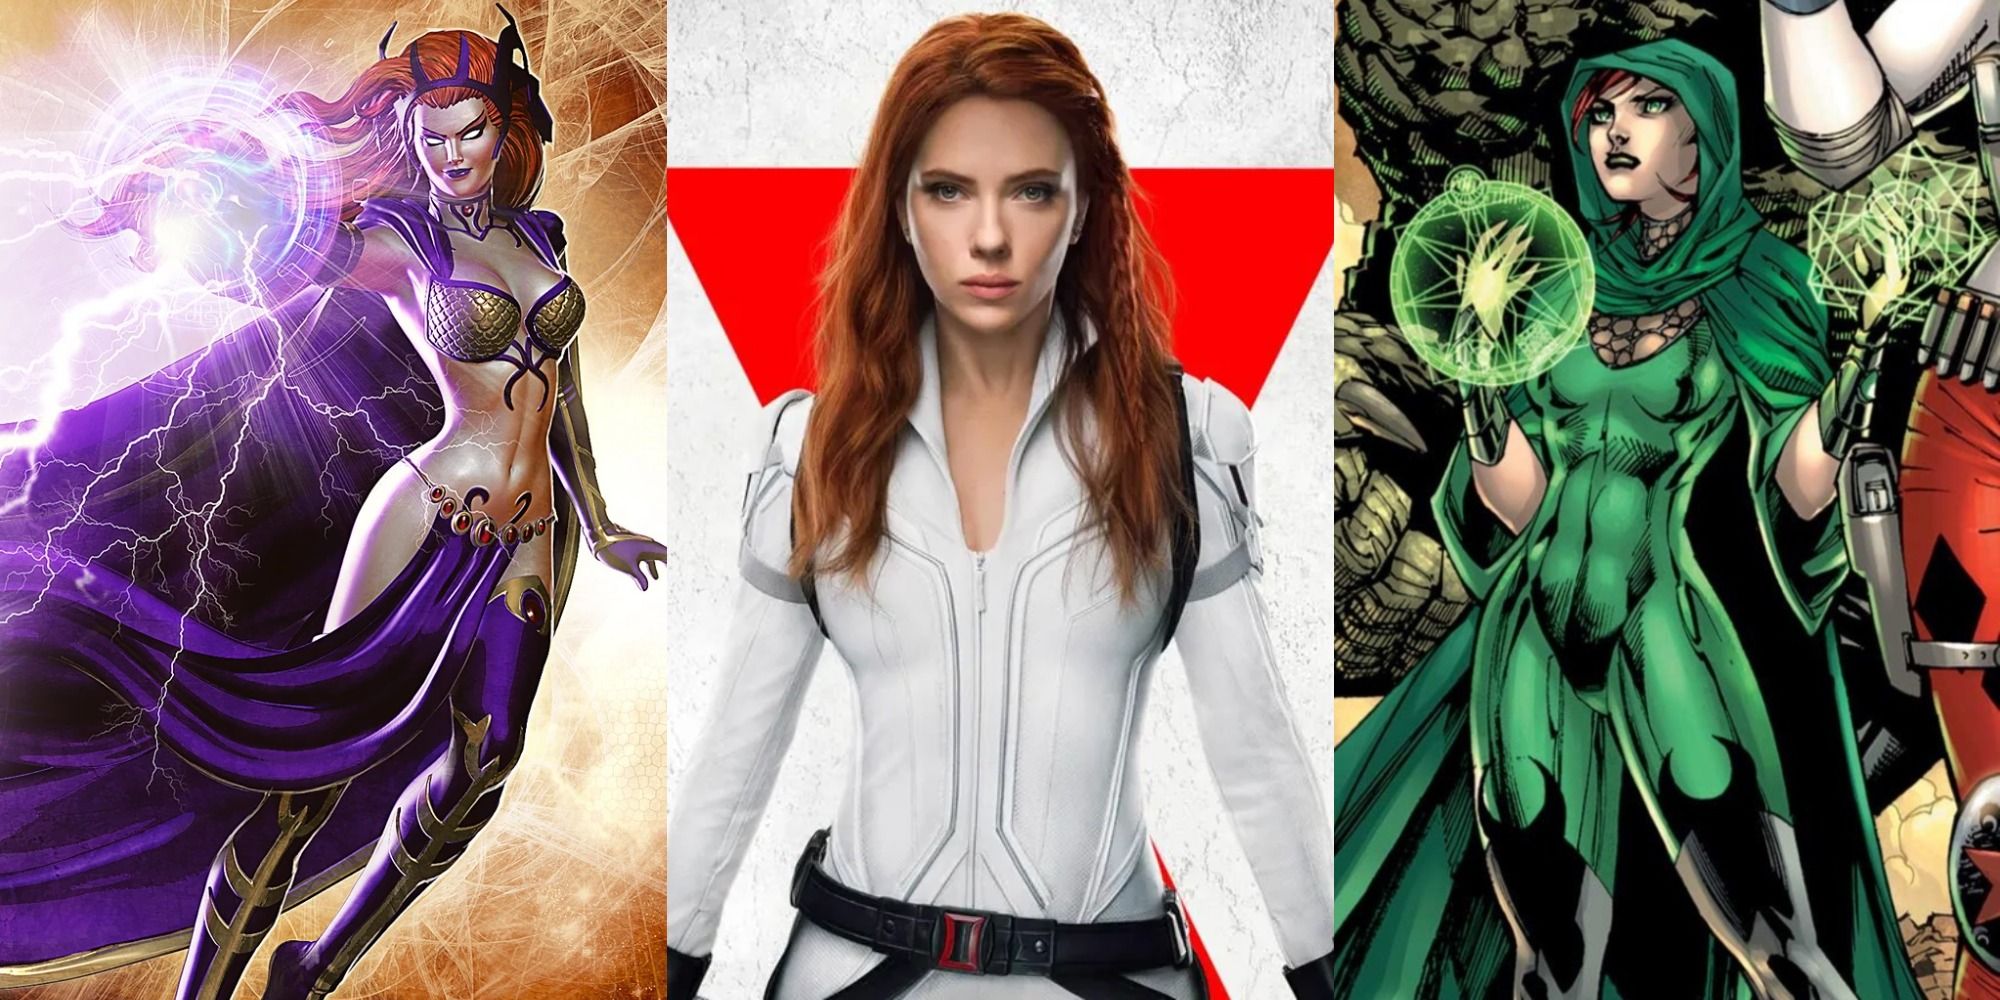 Split image showing Circe and Enchantress from DC Comics, and Scarlett Johansson as Black Widow.